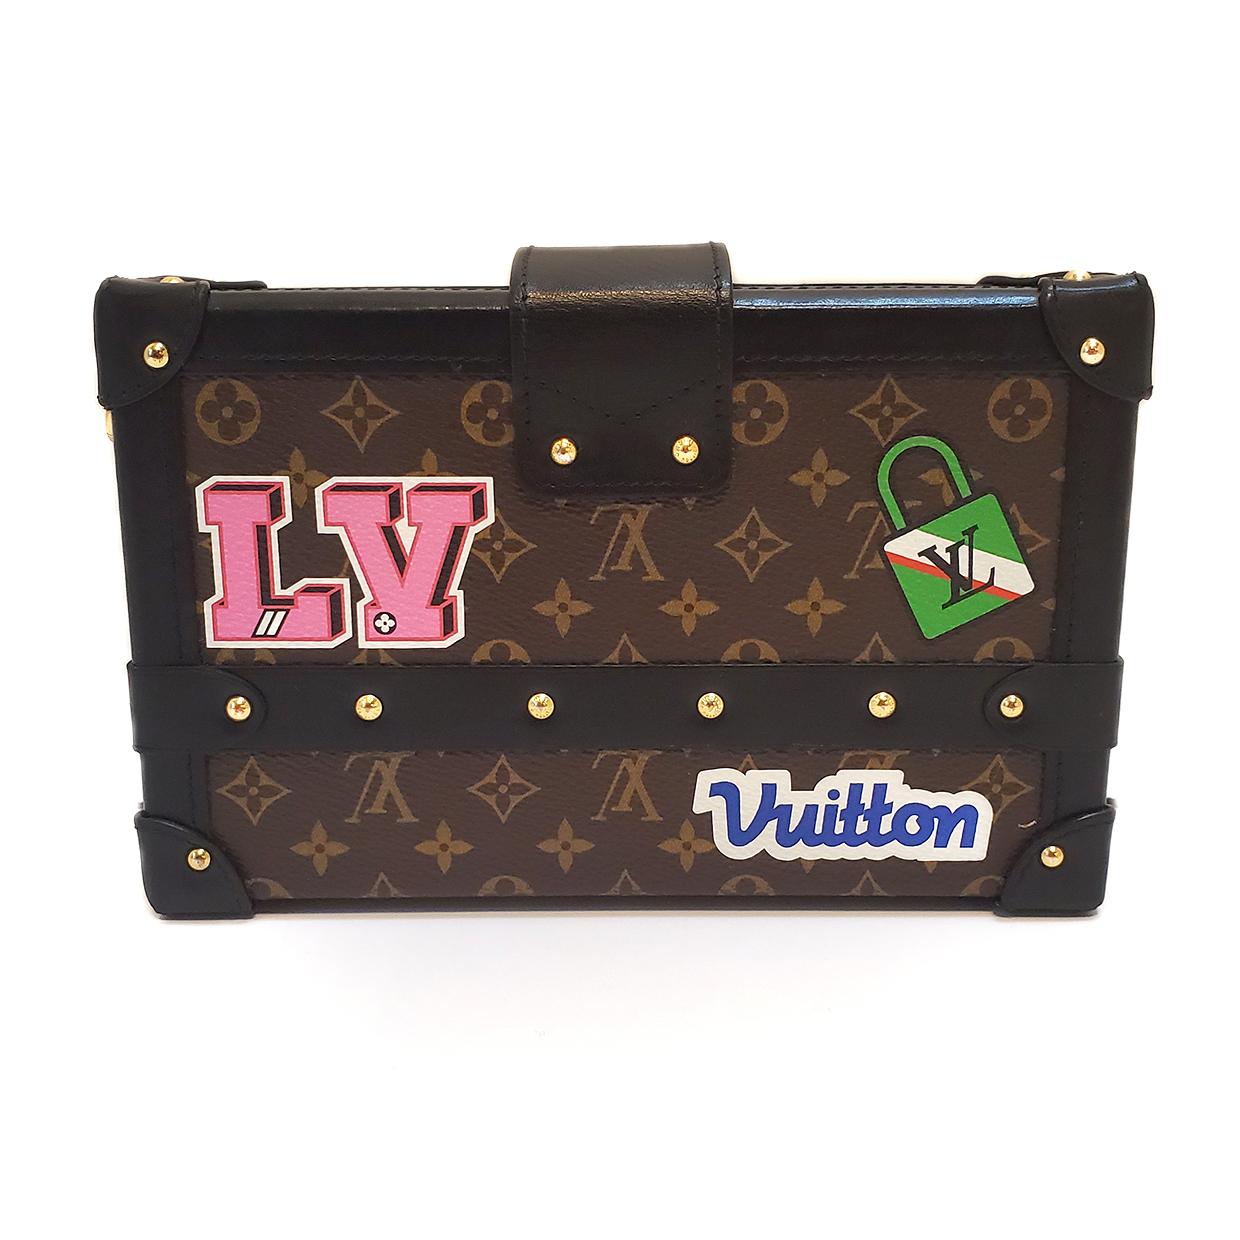 Brand - Louis Vuitton
Collection - Petite Malle Patches Stories
Estimated Retail - $5,850.00
Style - Crossbody
Material - Canvas
Color - Brown
Pattern - Monogram
Closure - Button Lock
Hardware Material - Goldtone
Model/Date Code - DU3148
Size -